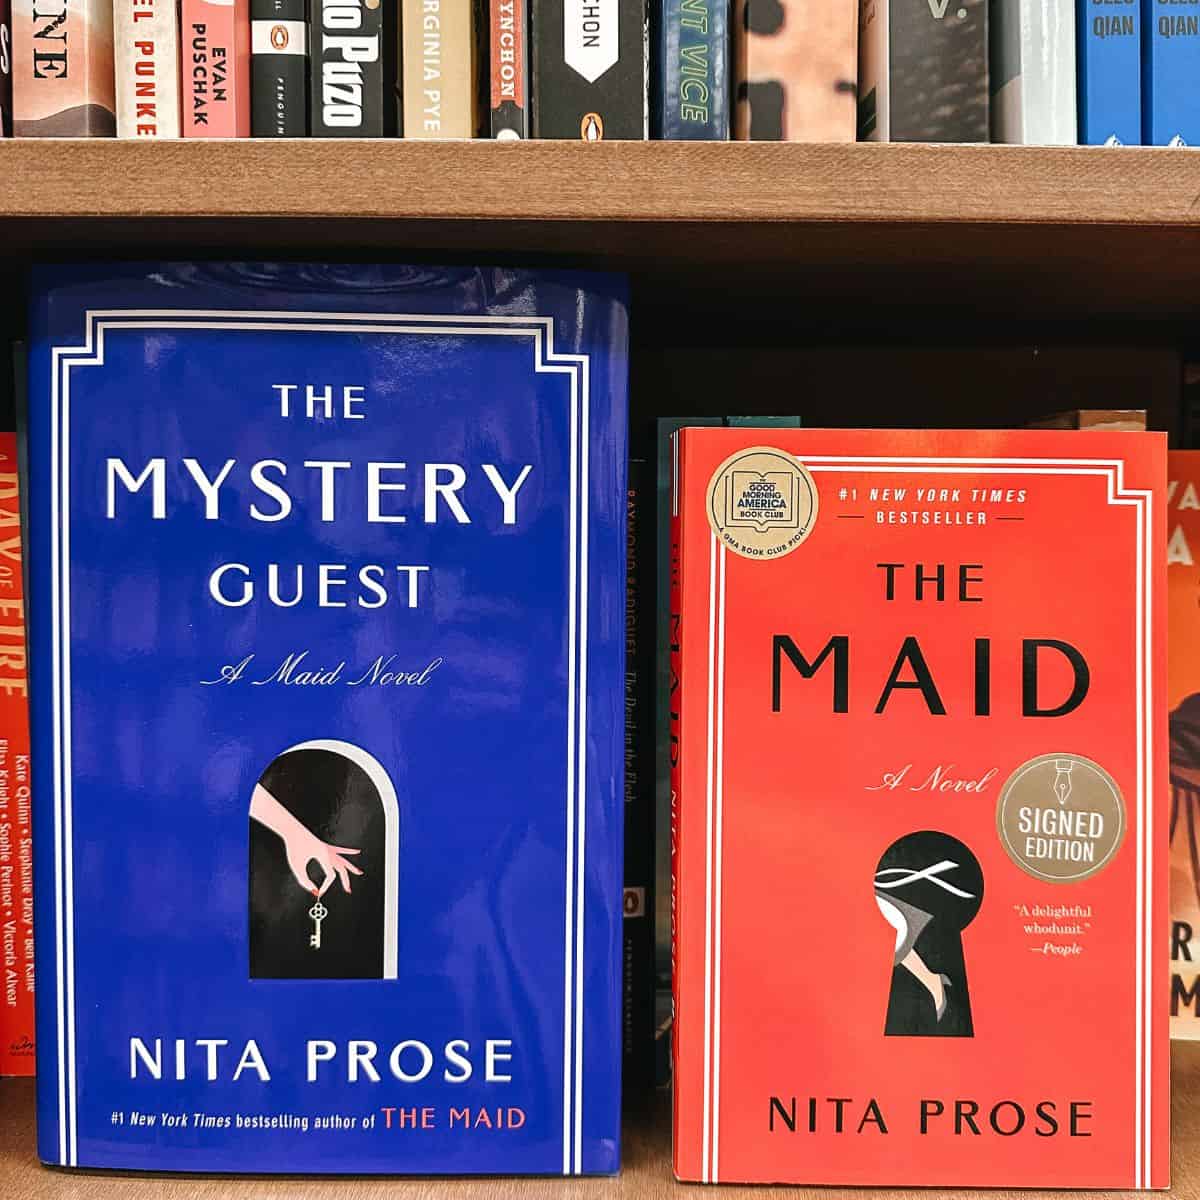 Molly The Maid Book Series Order: Guide to Nita Prose’s Mysteries